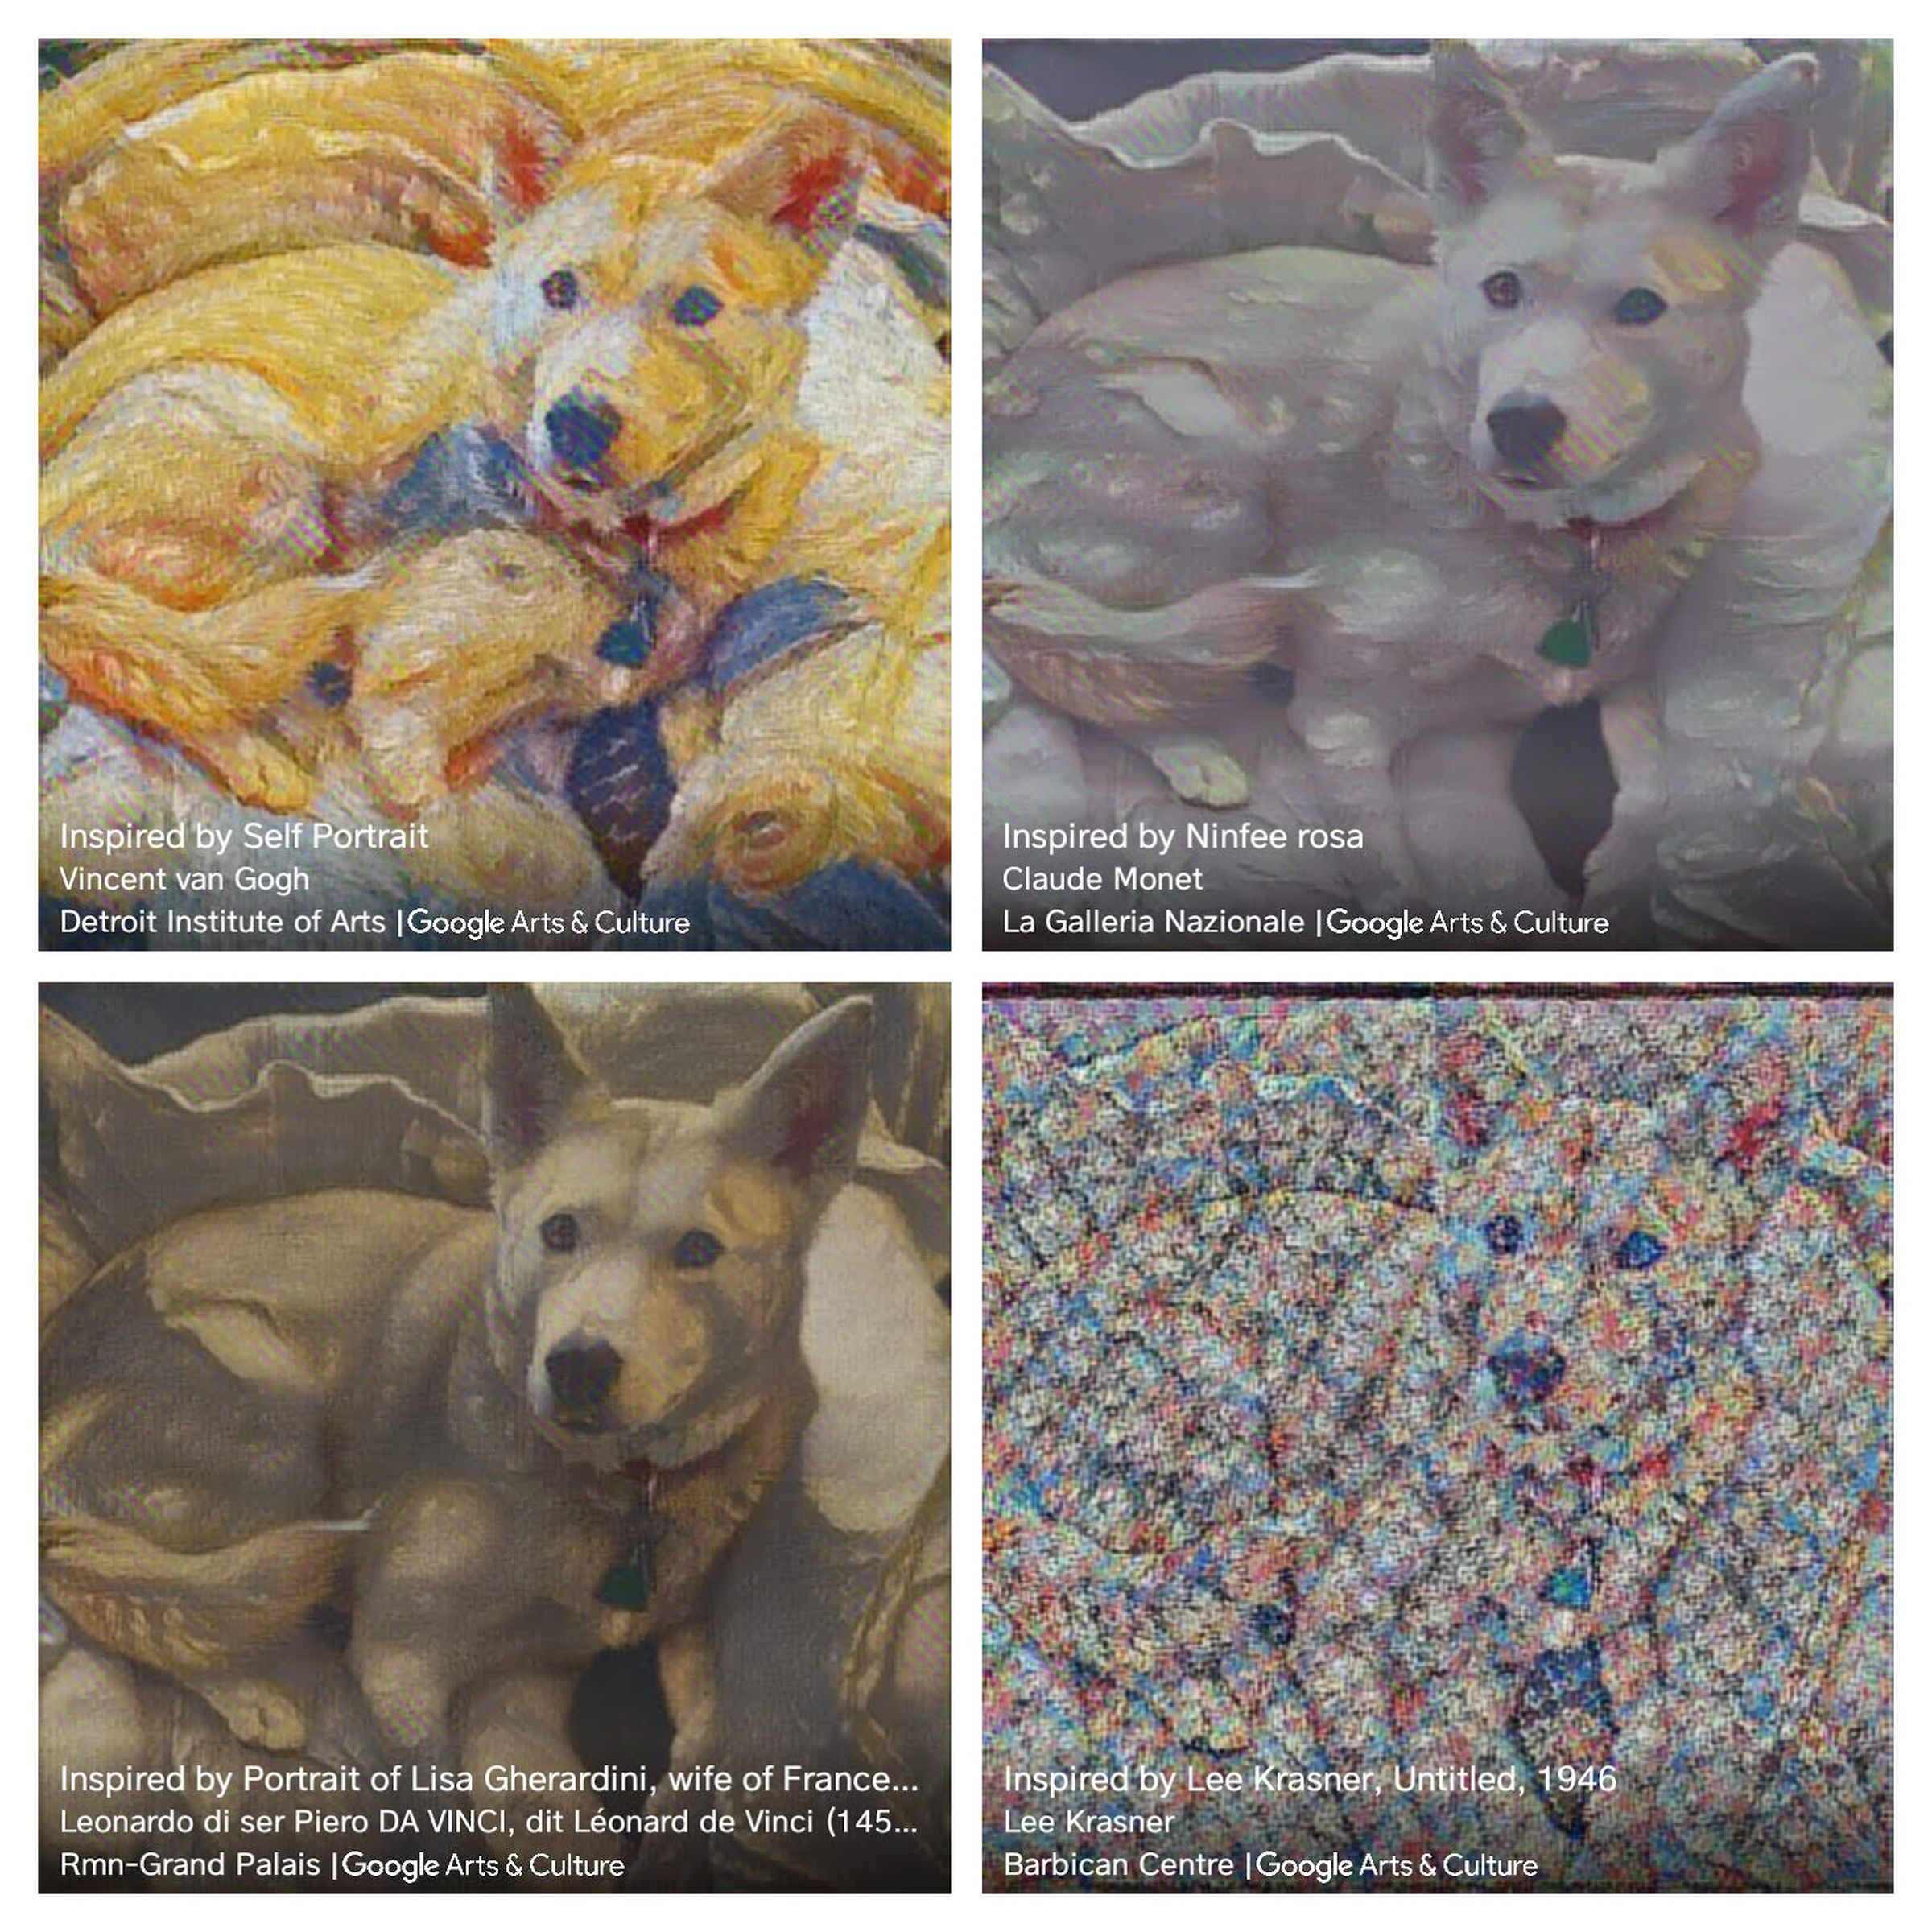 Zelda the dog styled as (clockwise from top) a van Gogh, a Monet, a da Vinci, and a Krasner.